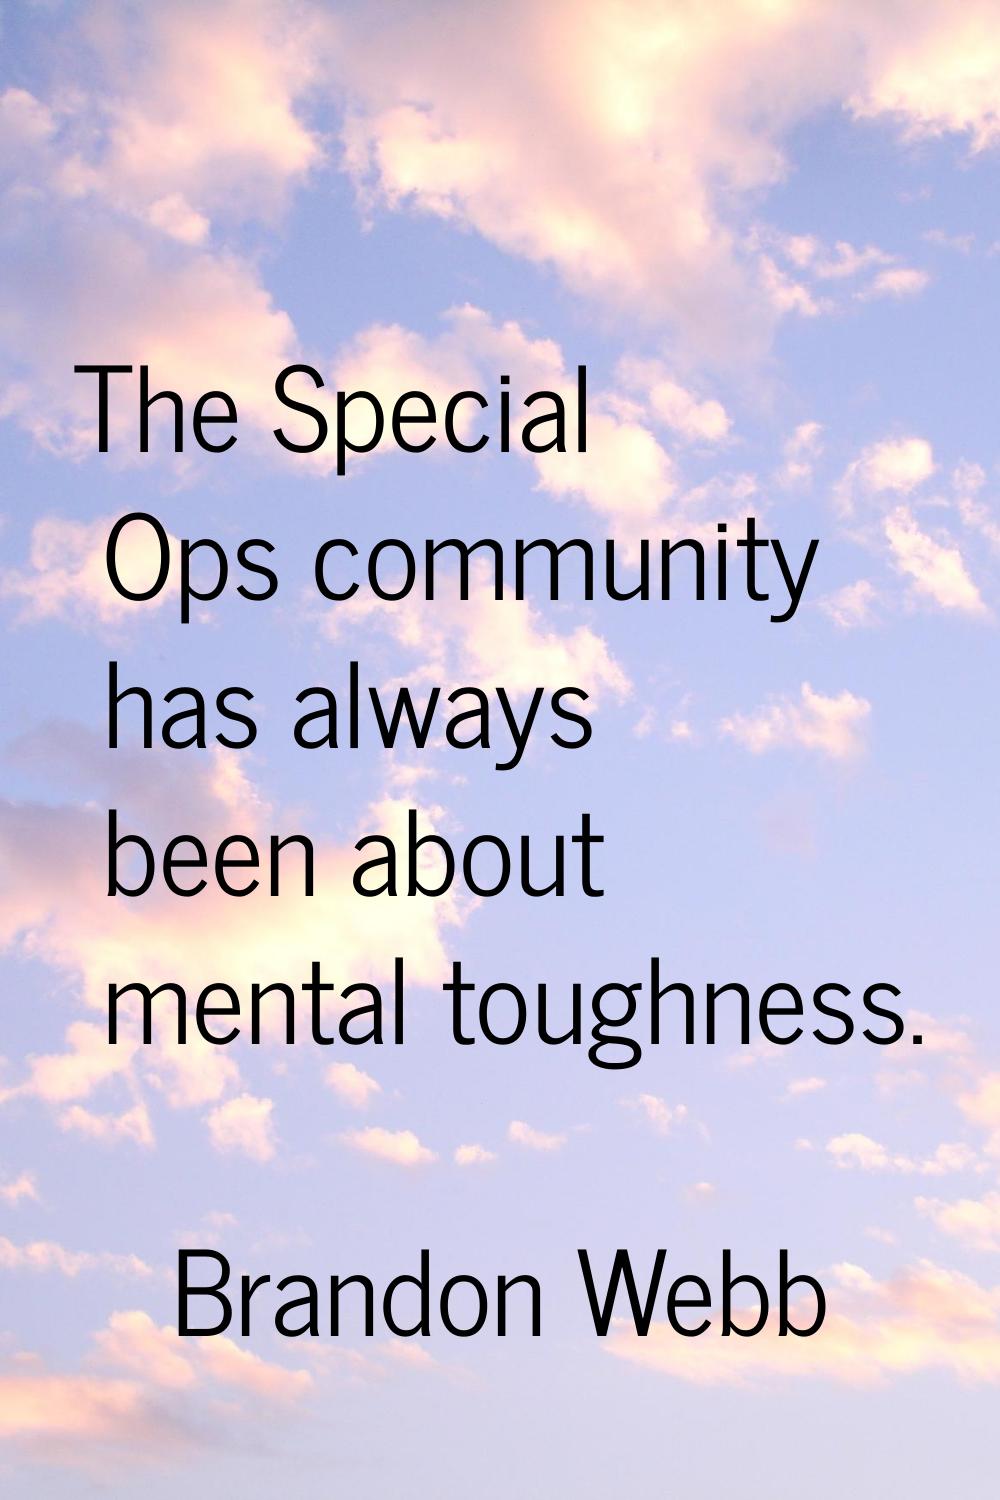 The Special Ops community has always been about mental toughness.